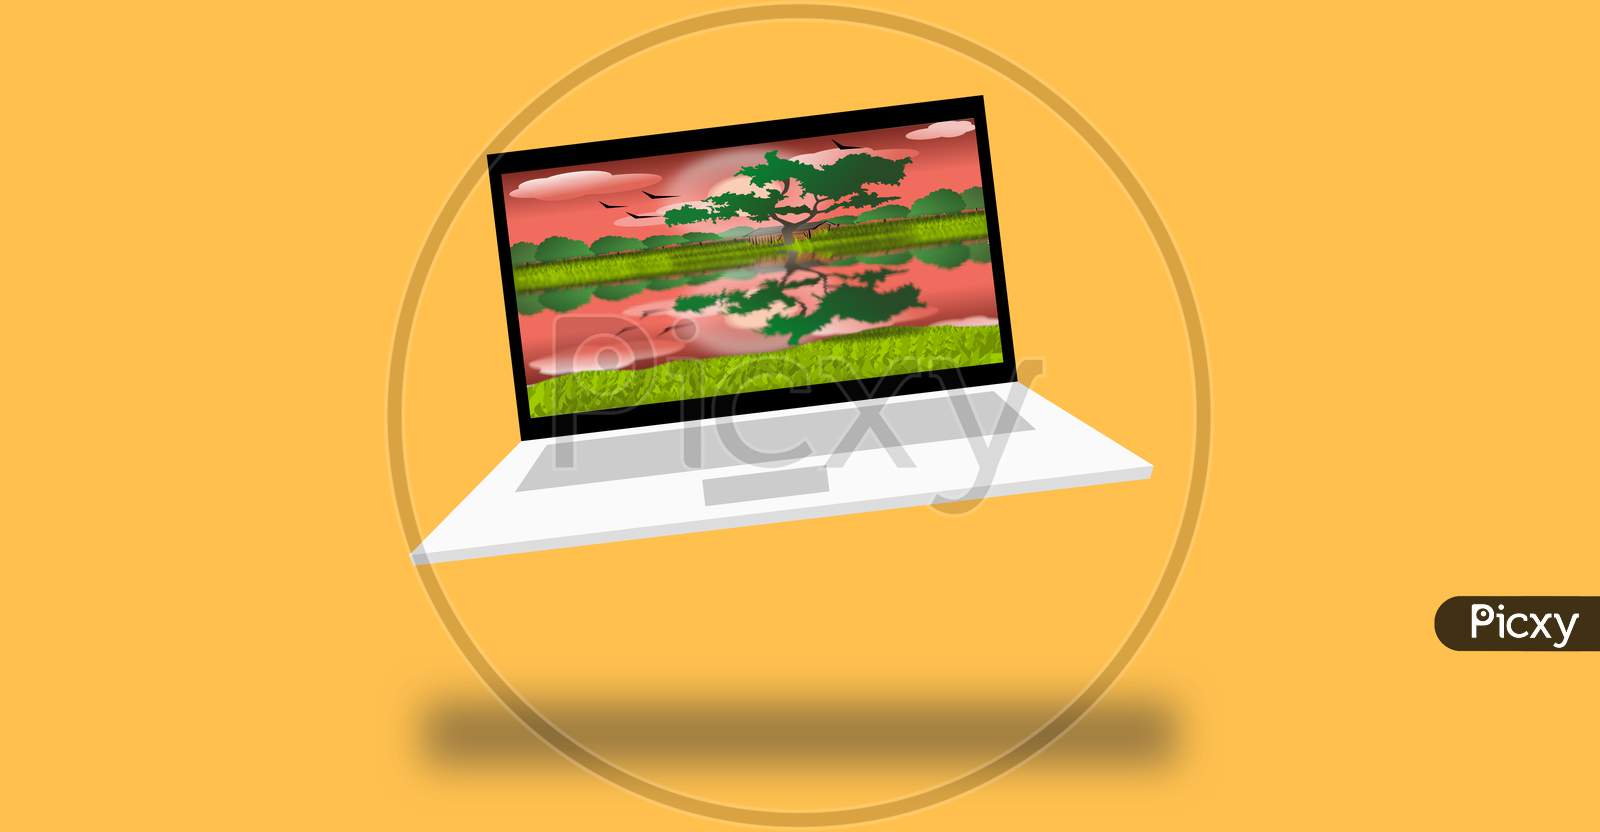 3D illustration graphic of a laptop with an evening view of the village with the red sky, bright sun, flying birds, trees, hurt, clouds, and reflection on the water, isolated on yellow background.